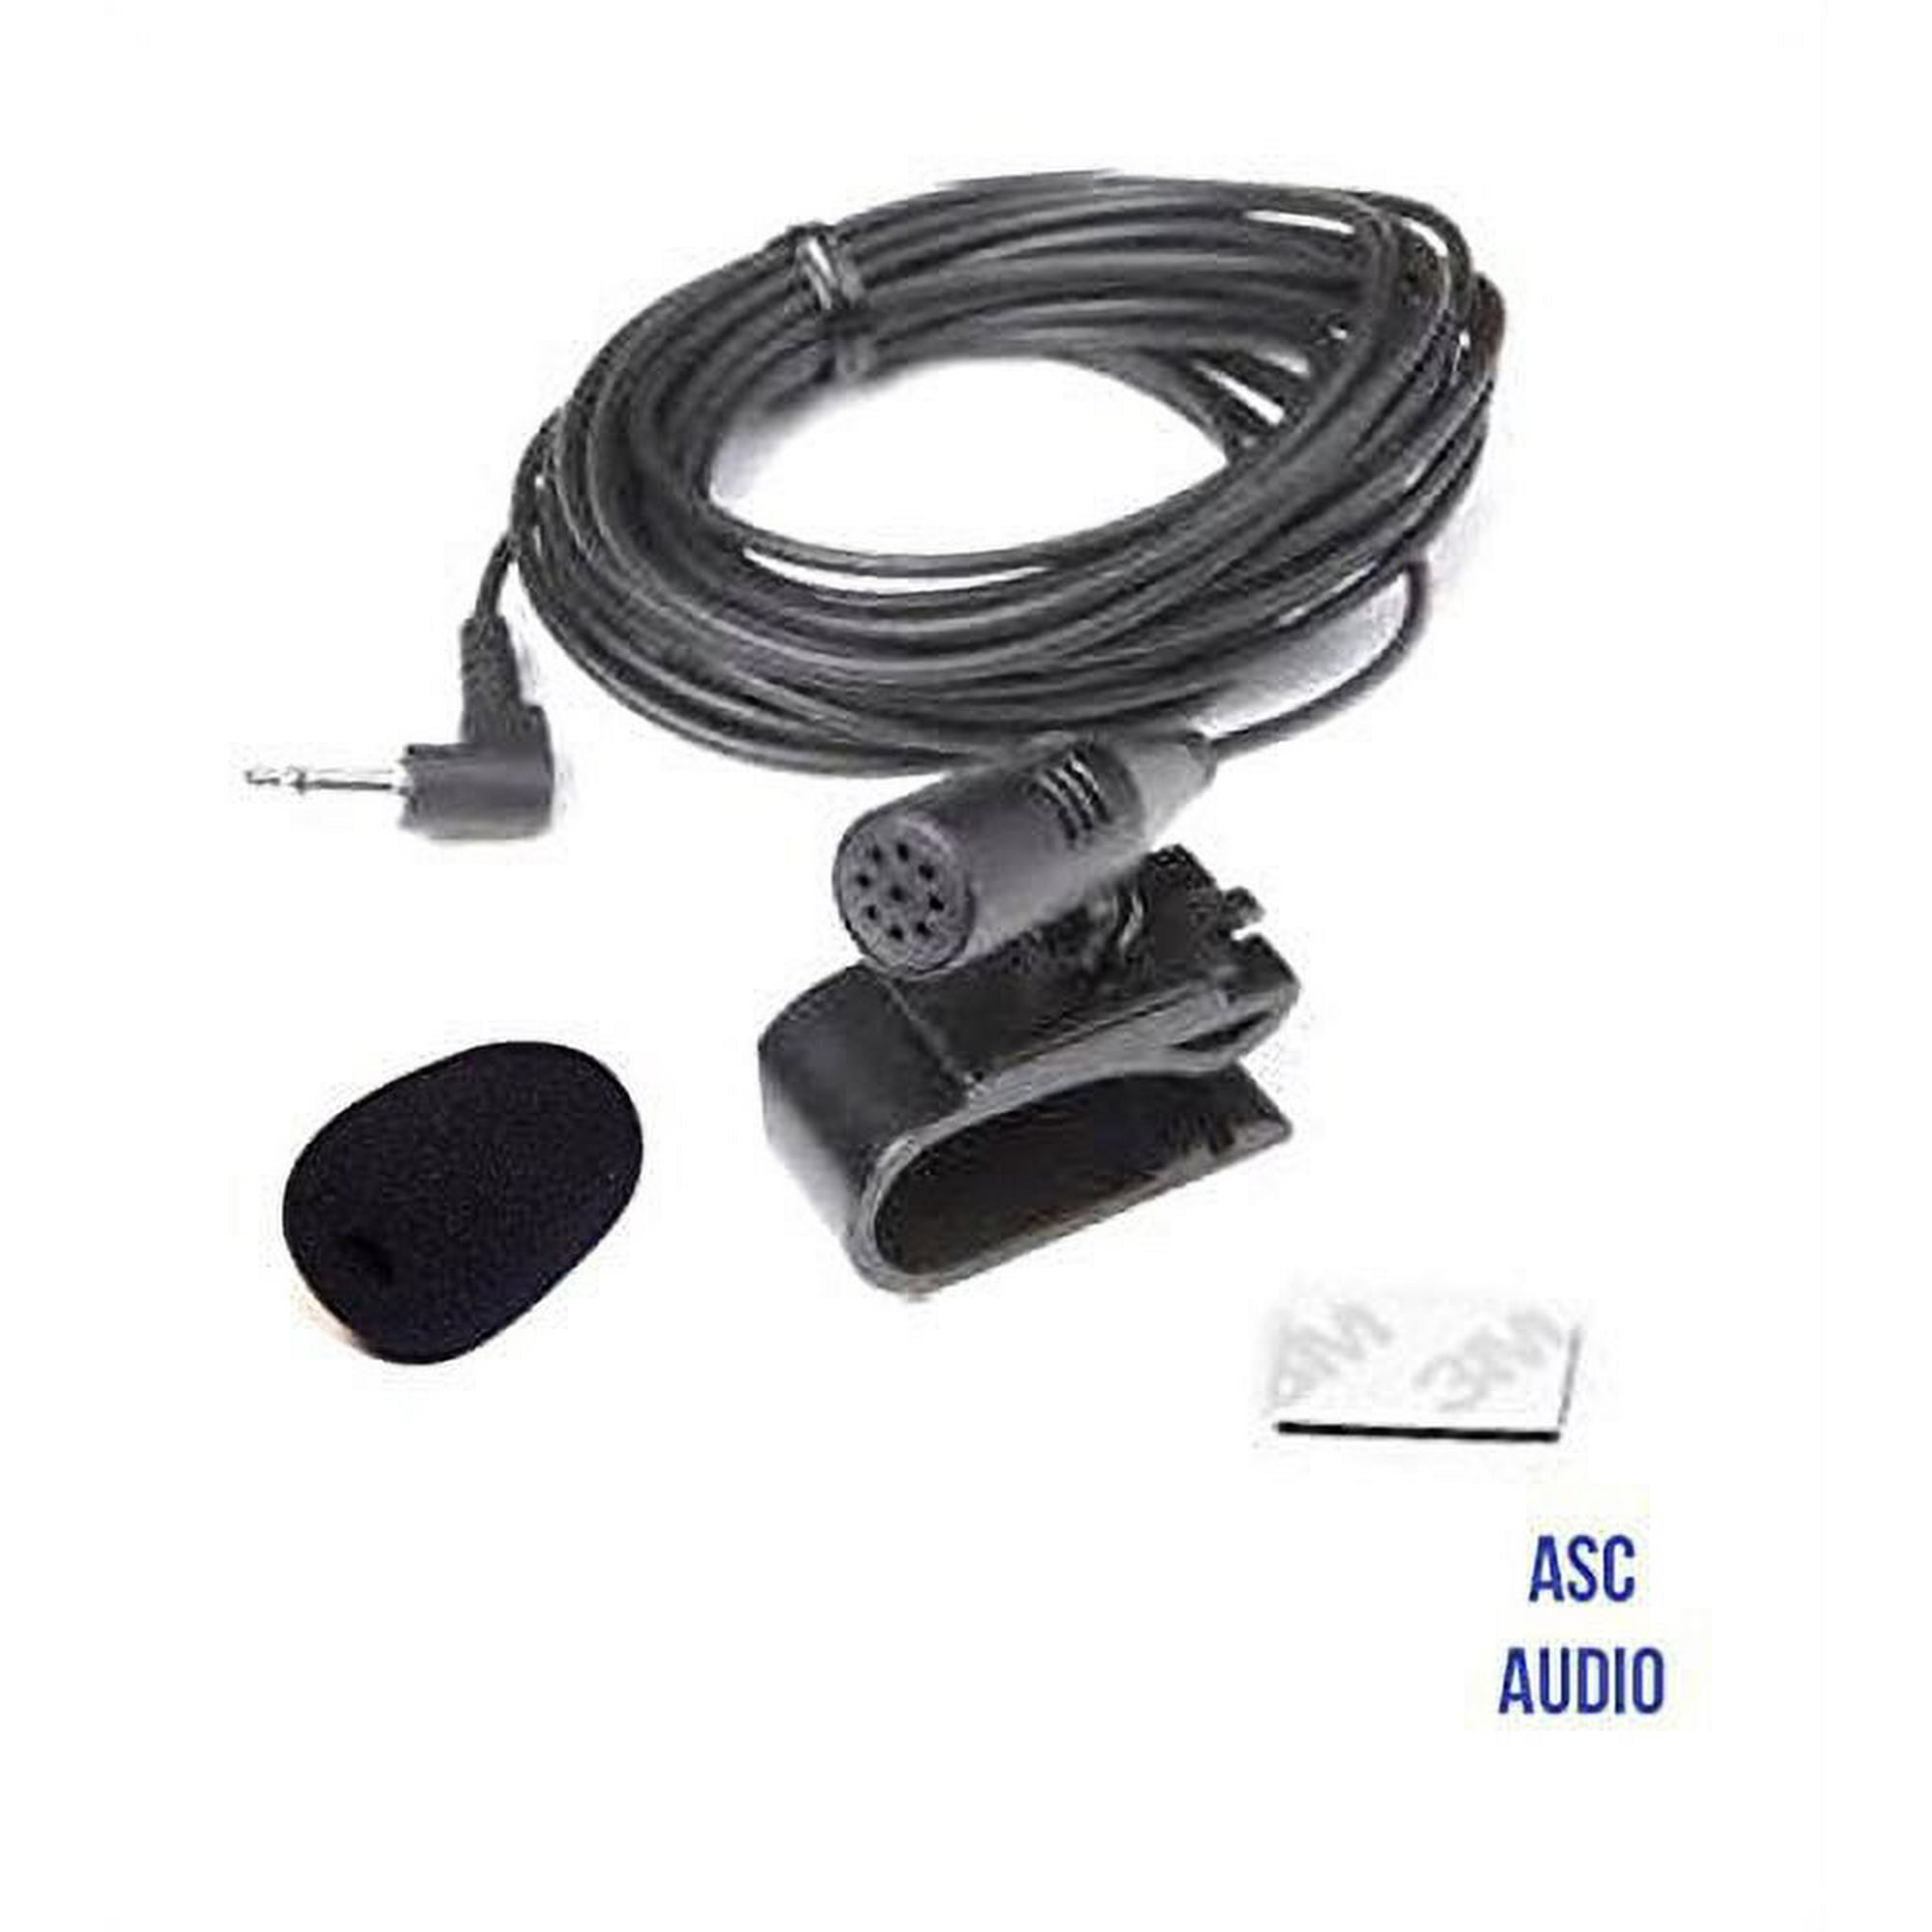 ASC Audio BlueTooth Car Stereo Mic Microphone Assembly Kit for